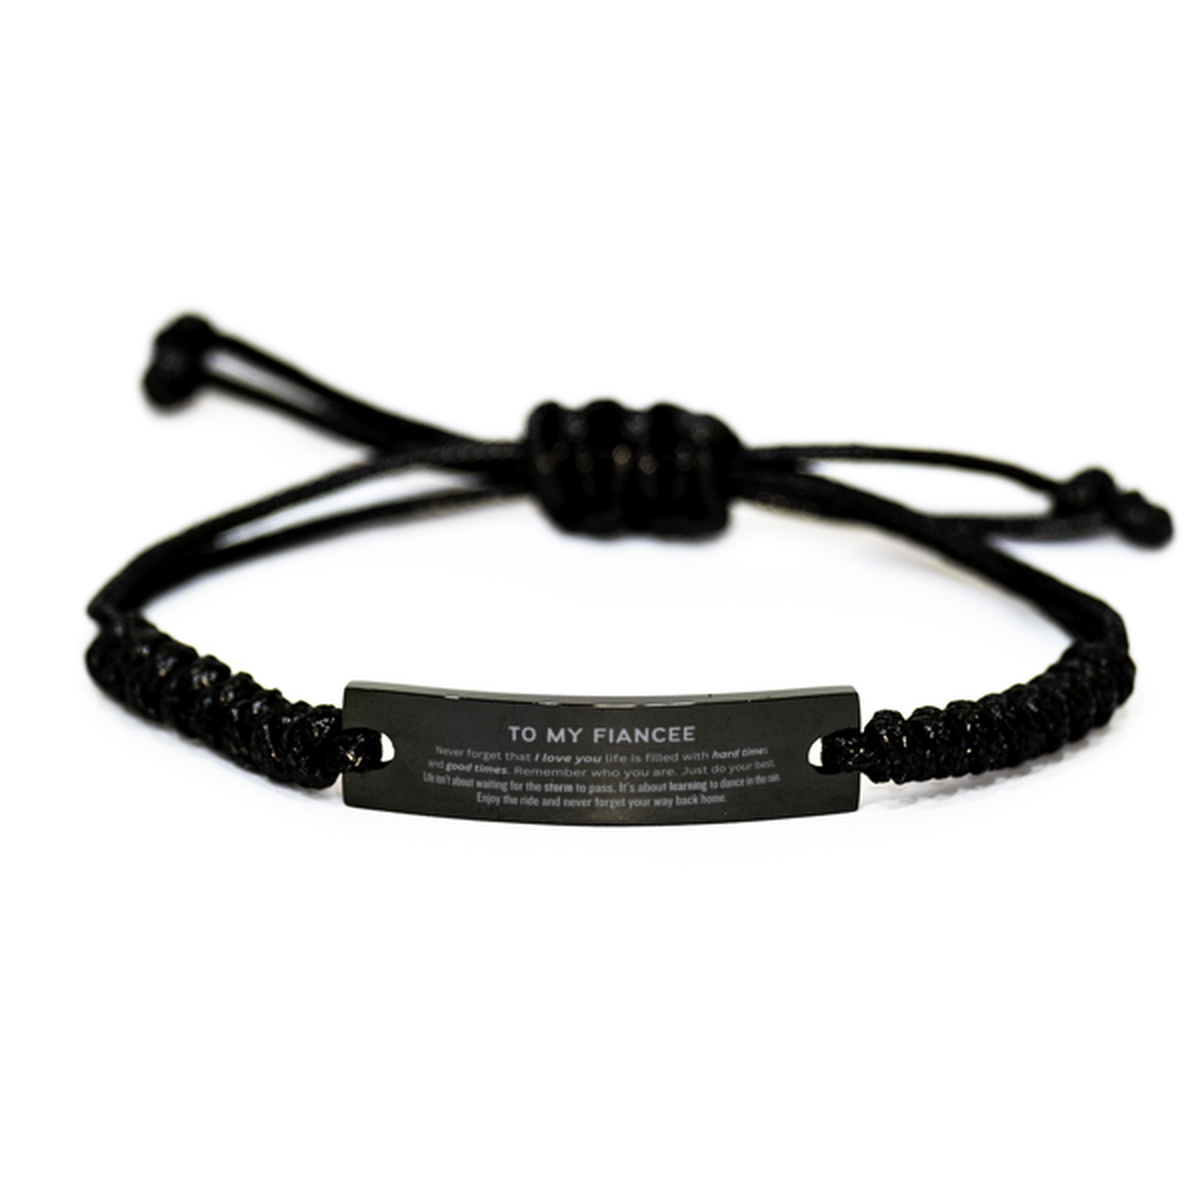 Christmas Fiancee Black Rope Bracelet Gifts, To My Fiancee Birthday Thank You Gifts For Fiancee, Graduation Unique Gifts For Fiancee To My Fiancee Never forget that I love you life is filled with hard times and good times. Remember who you are. Just do yo